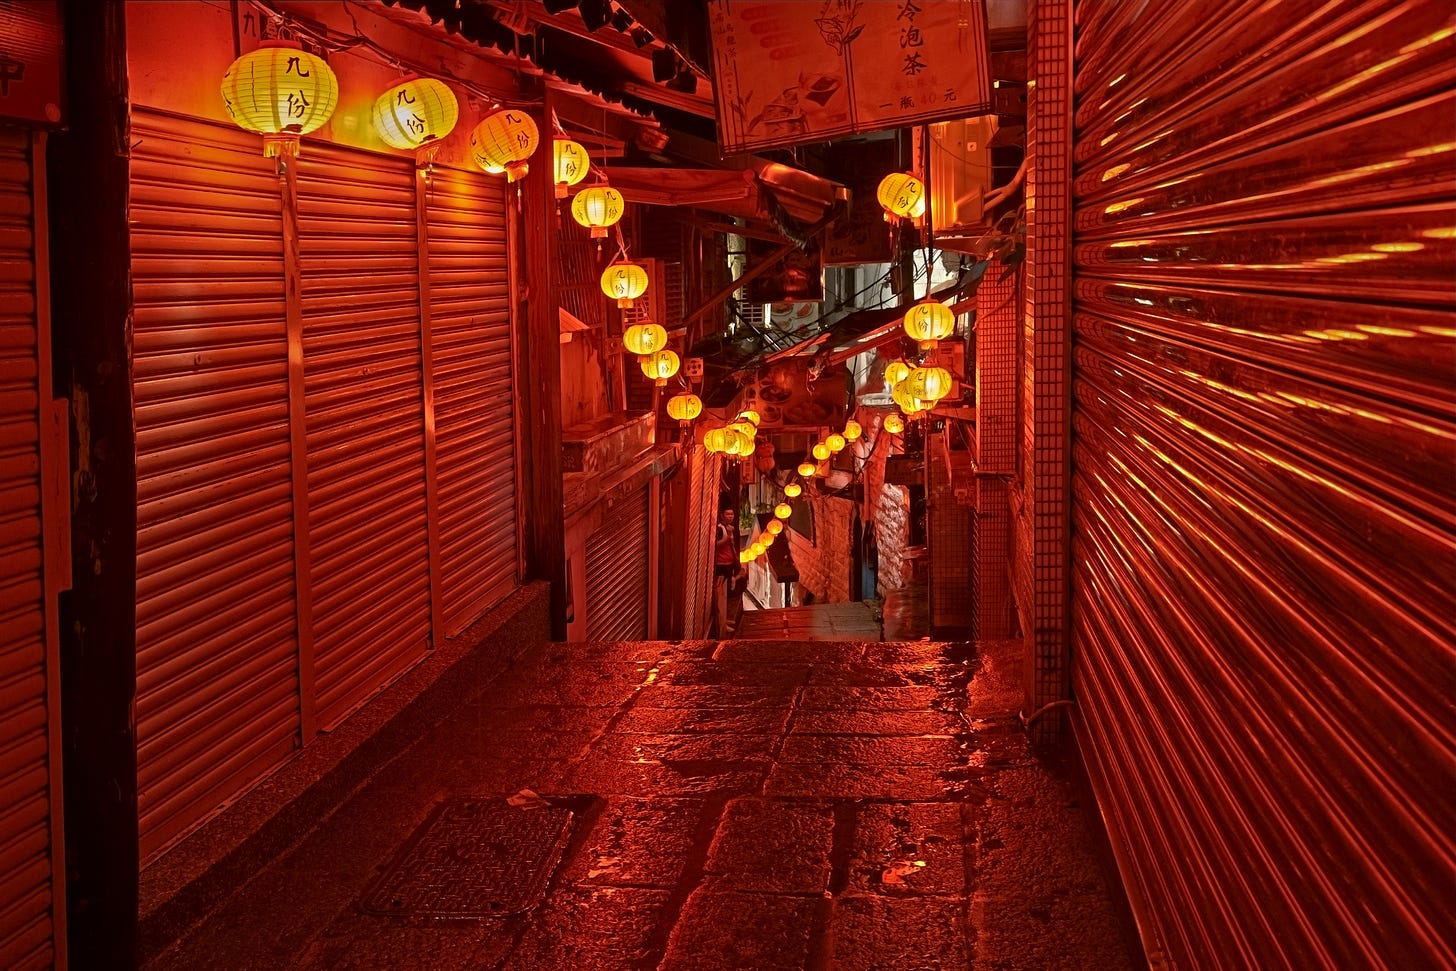 The closed metal doors of shops along the narrow alleys of Jiufen Old Street 九份老街 reflect the light of red lanterns